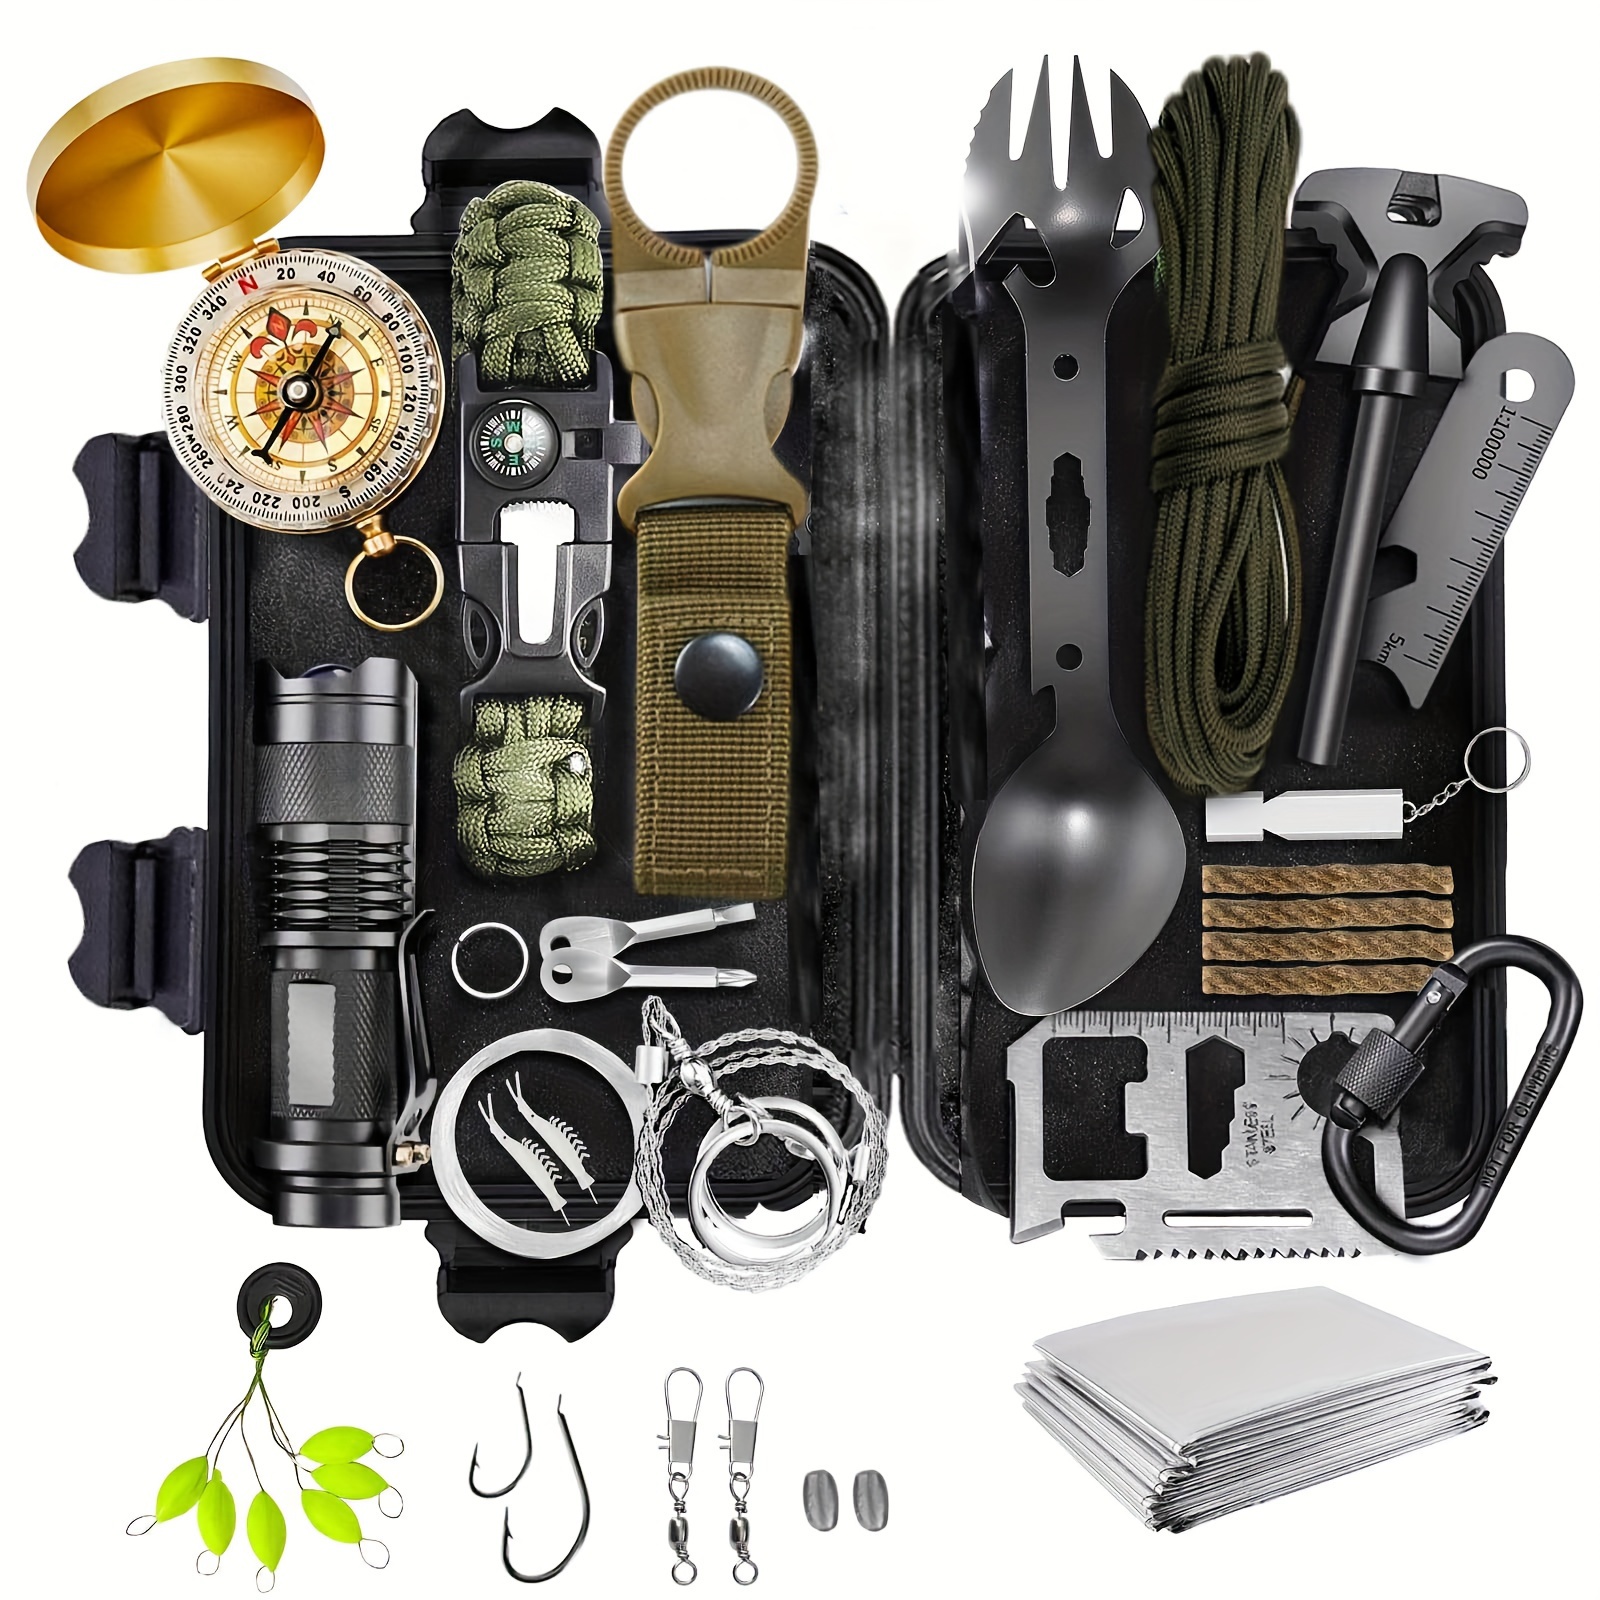 9 In 1 Survival Gear Kits for Outdoor Camping, Hiking, and Hunting